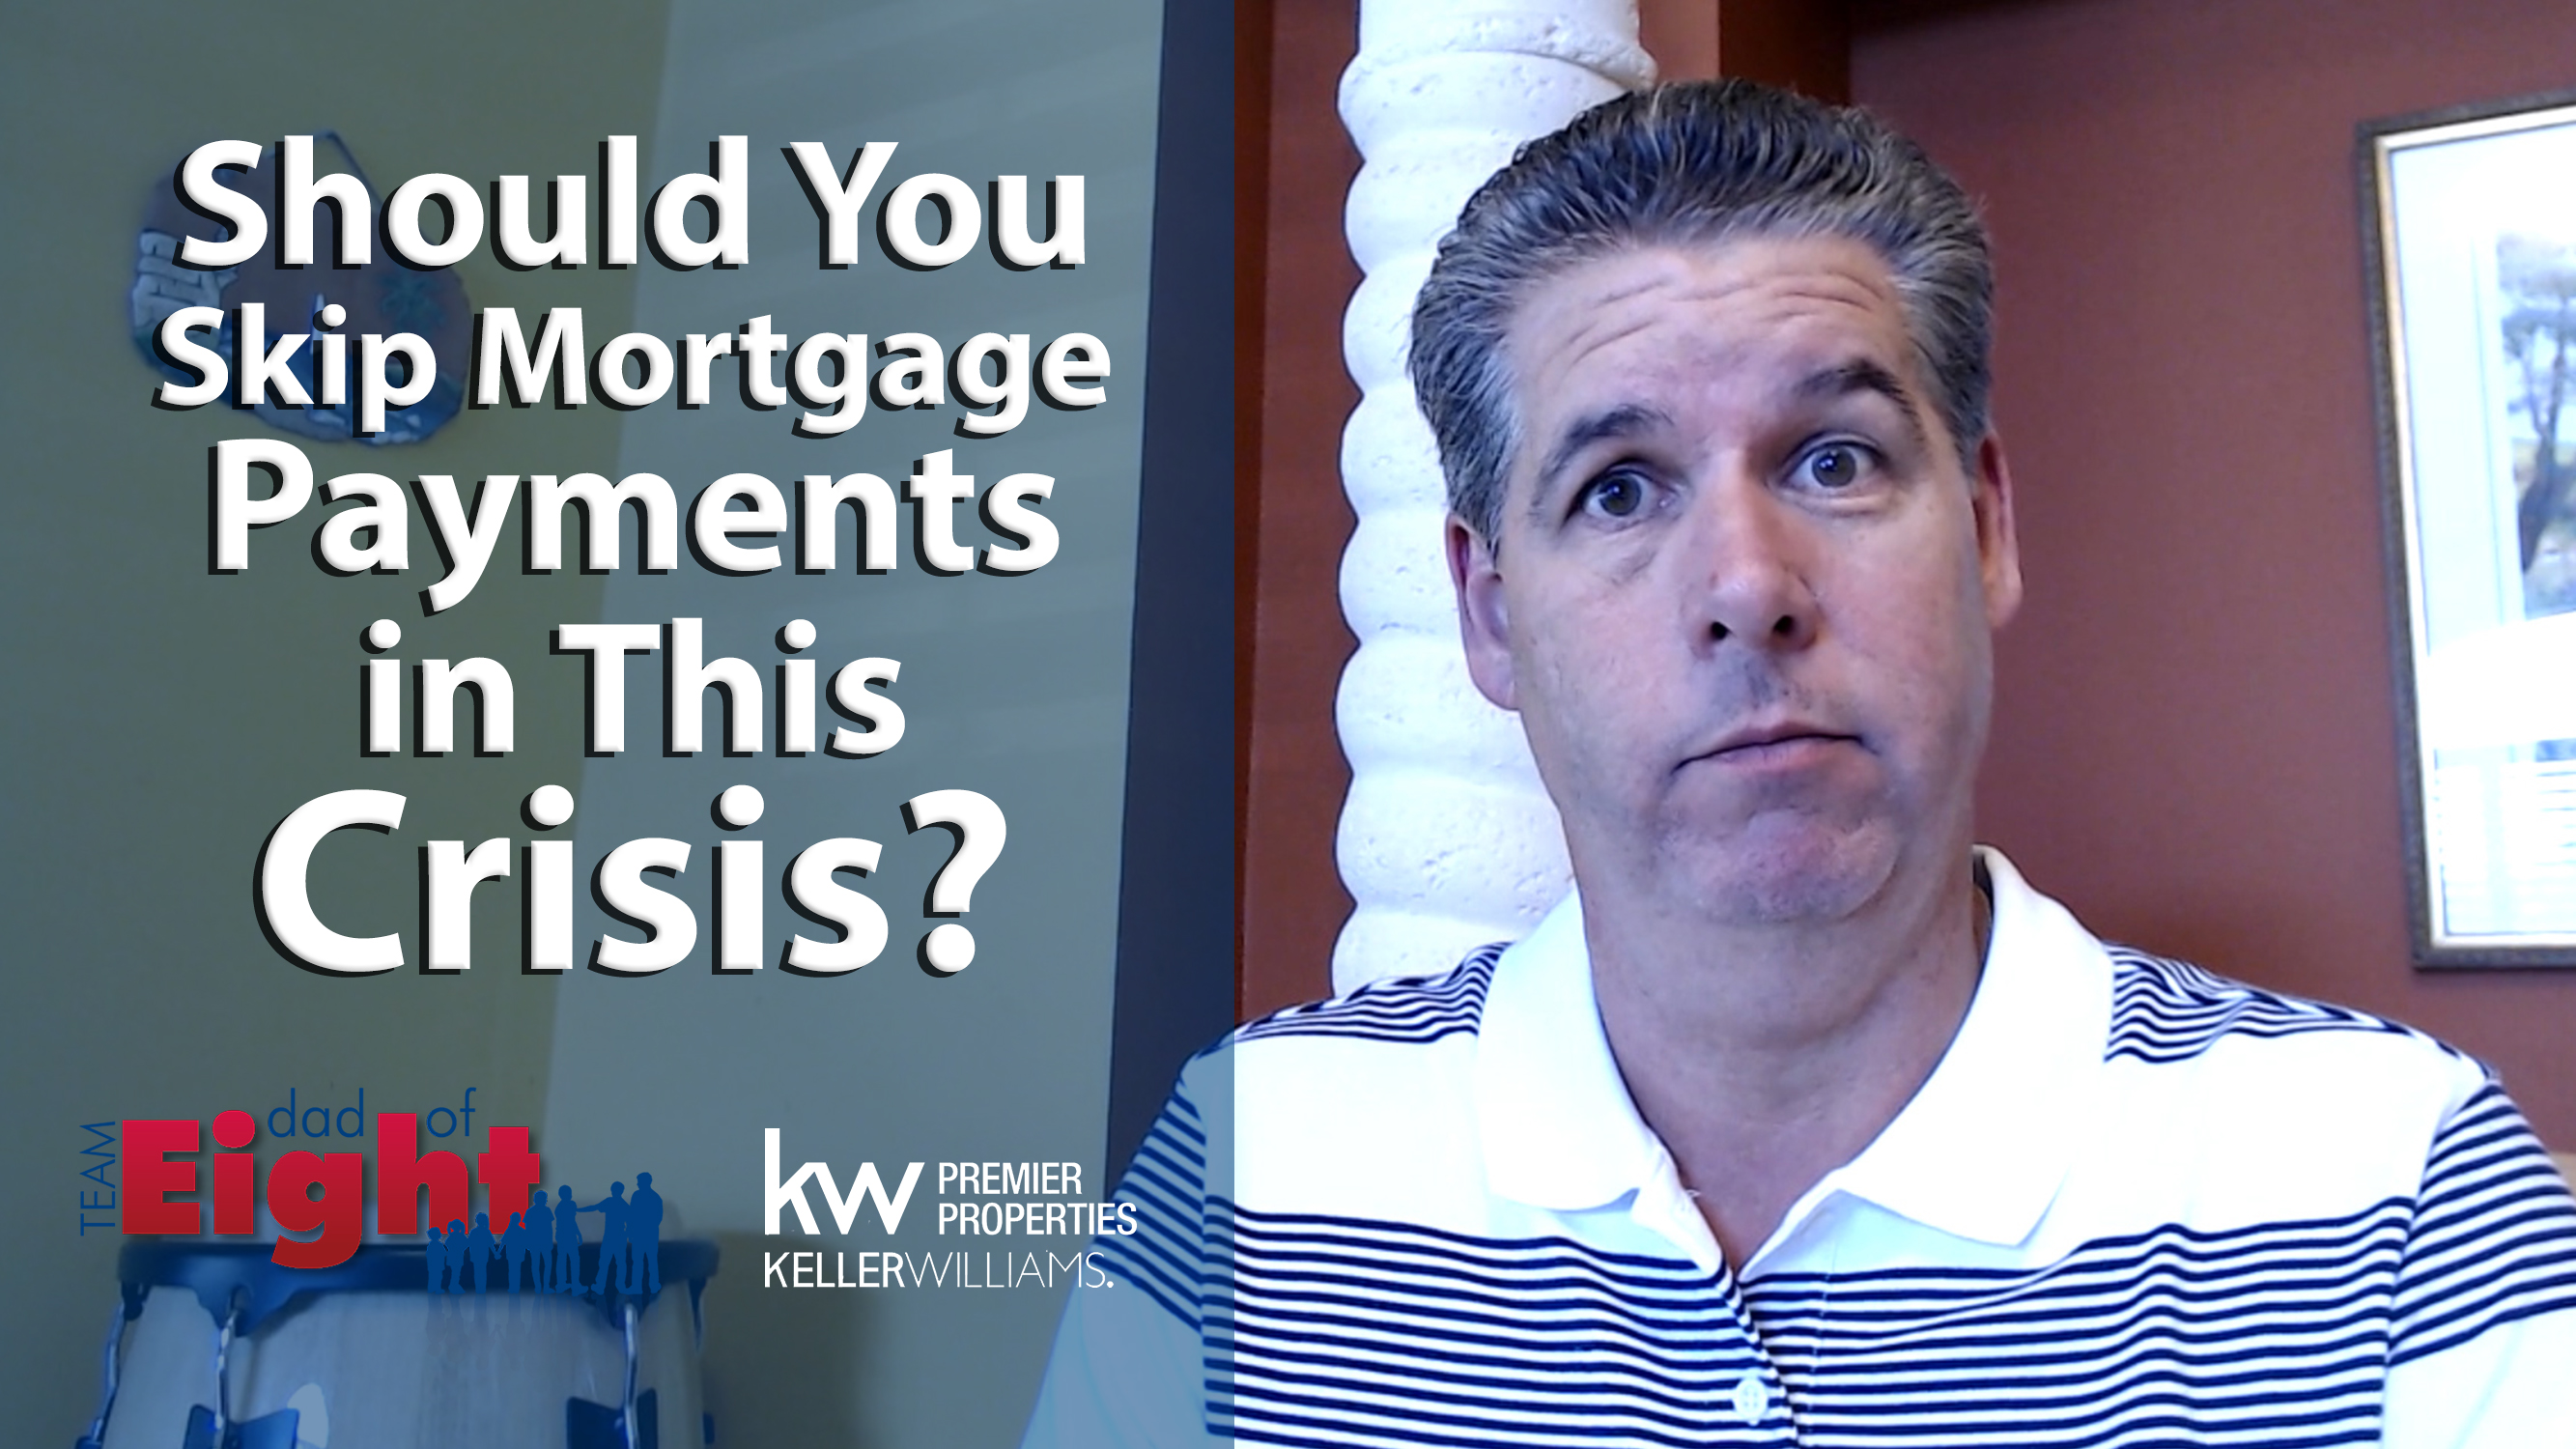 Does the COVID-19 Cares Act Stimulus Plan Allow for You to Skip Mortgage Payments?